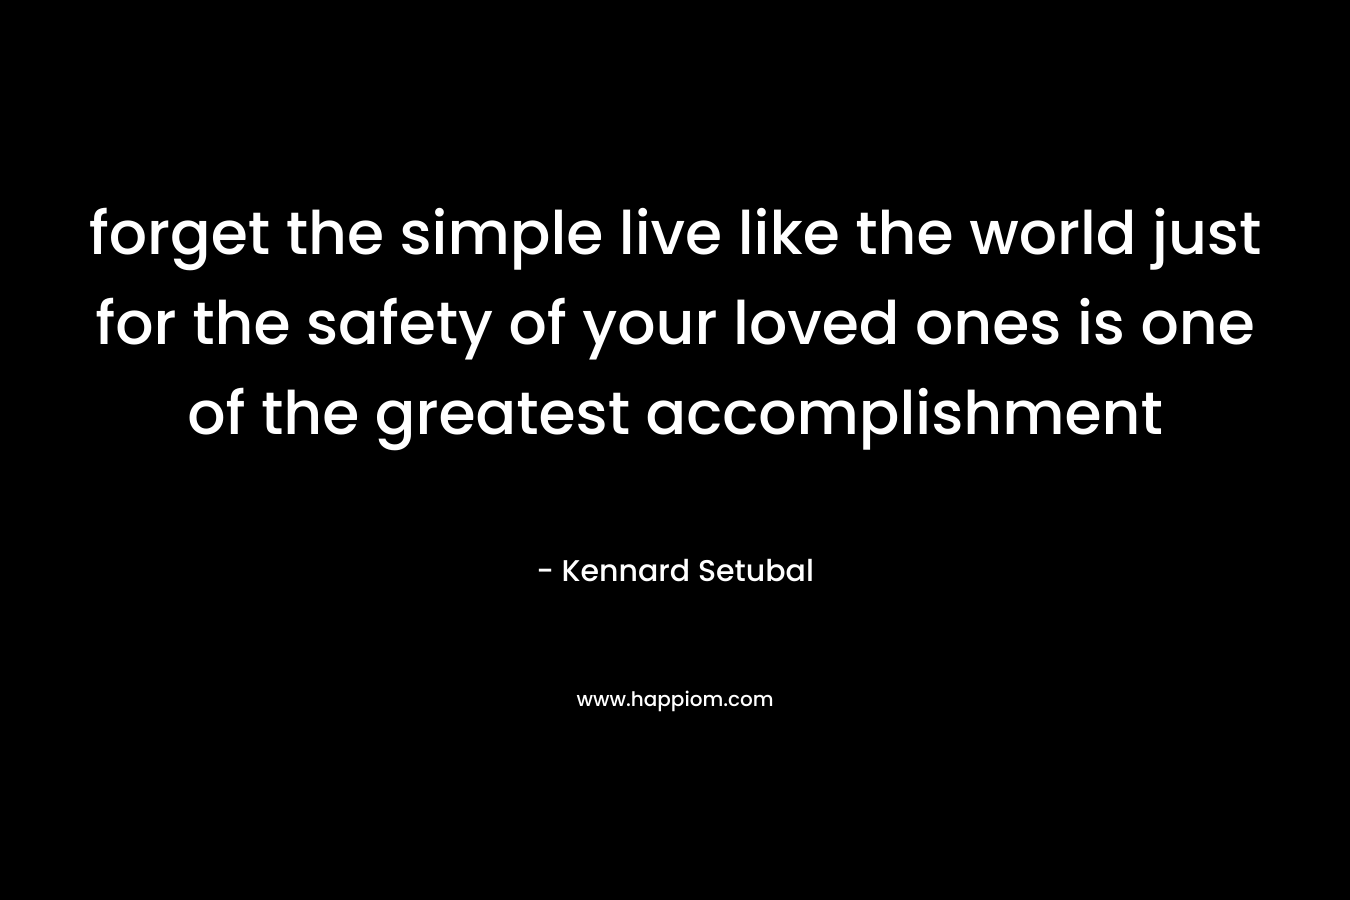 forget the simple live like the world just for the safety of your loved ones is one of the greatest accomplishment – Kennard Setubal